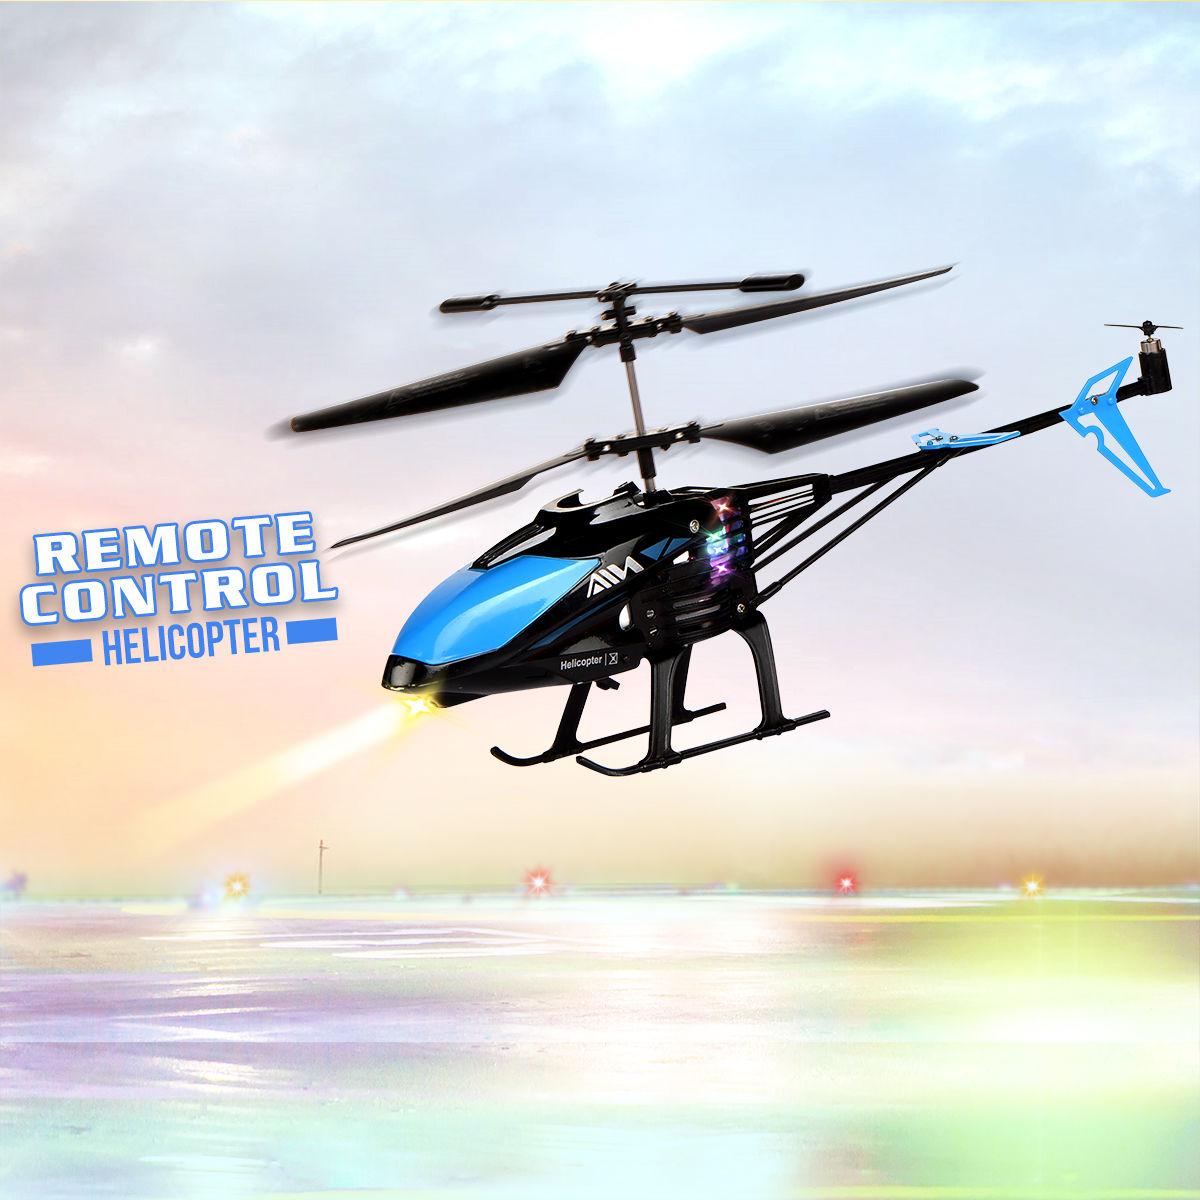 Remote Control Wale Helicopter: Design and Features